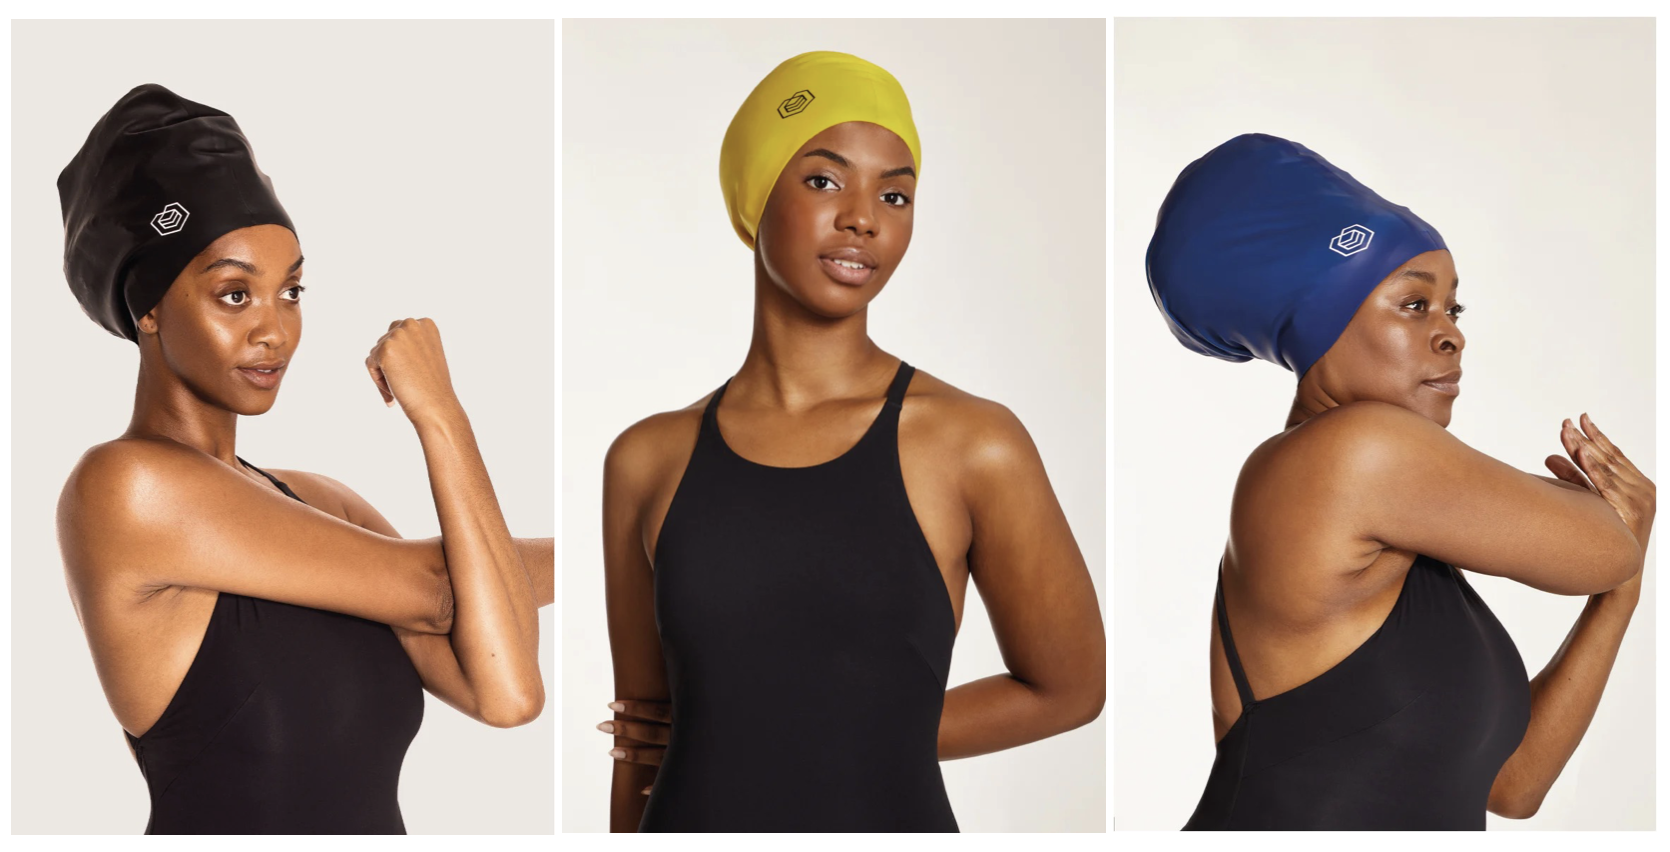 A swimming cap called Soul Cap designed to protect the natural hair of athletes gained FINA’s approval